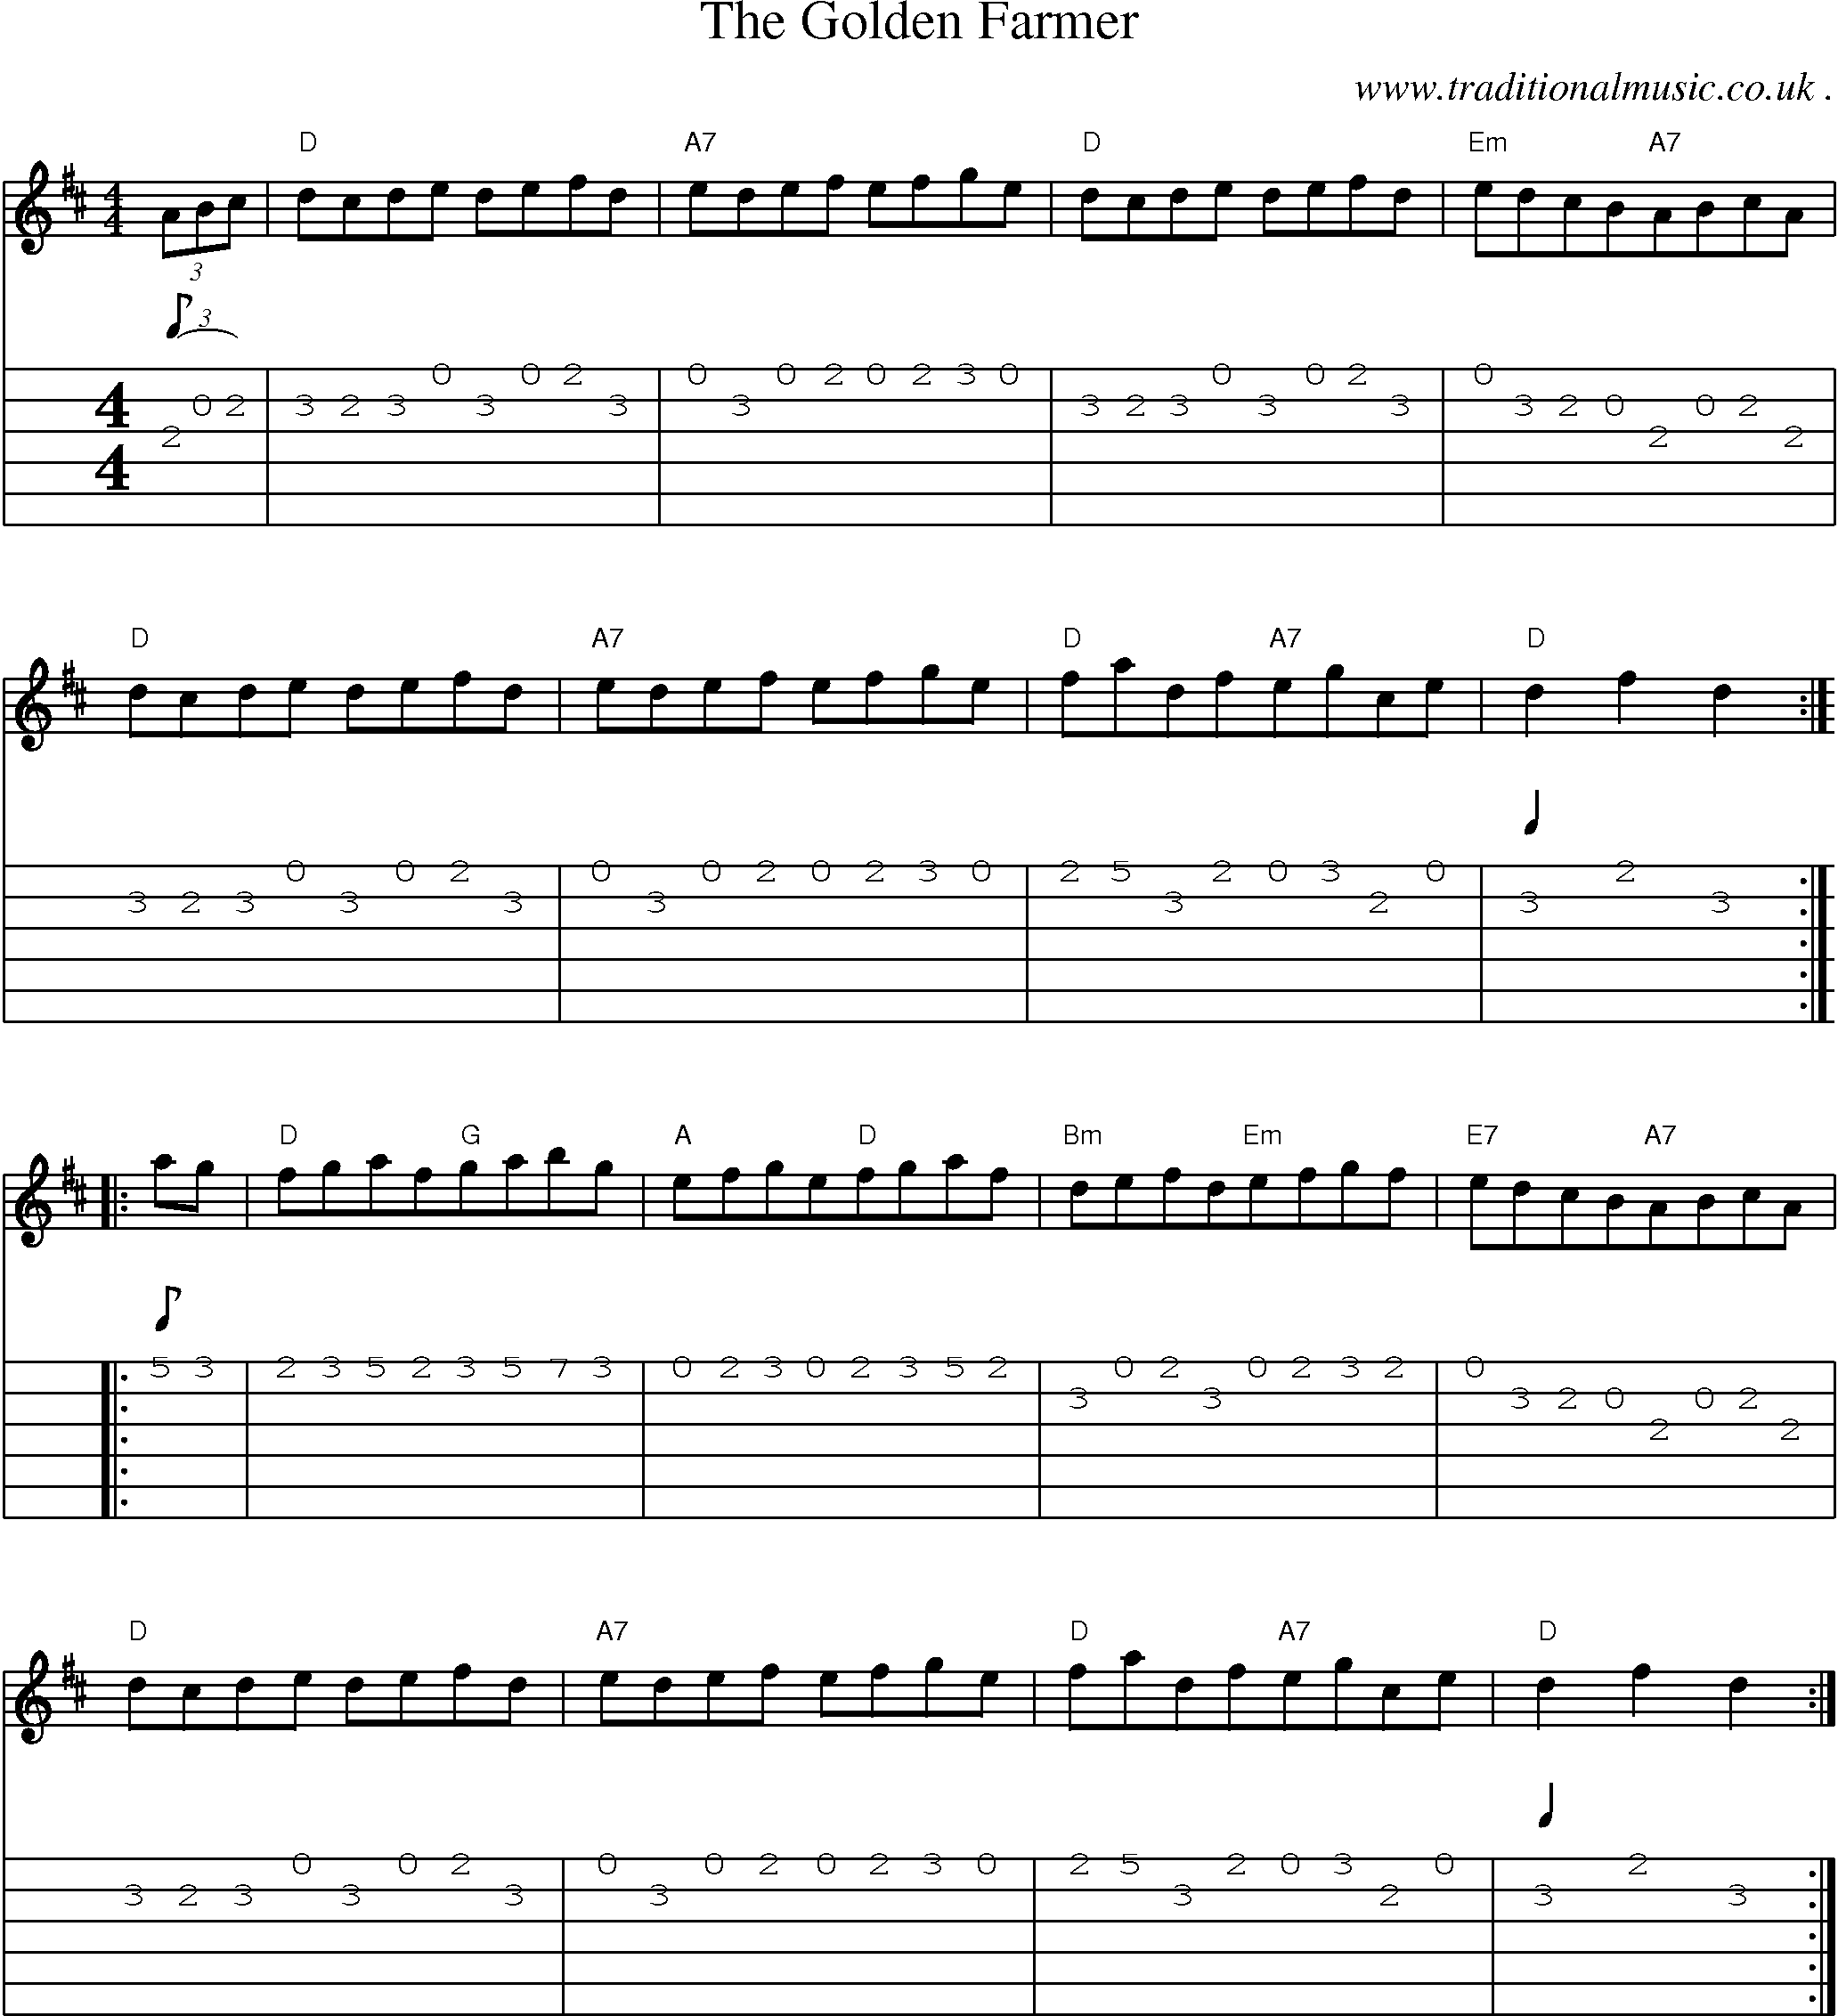 Sheet-Music and Guitar Tabs for The Golden Farmer